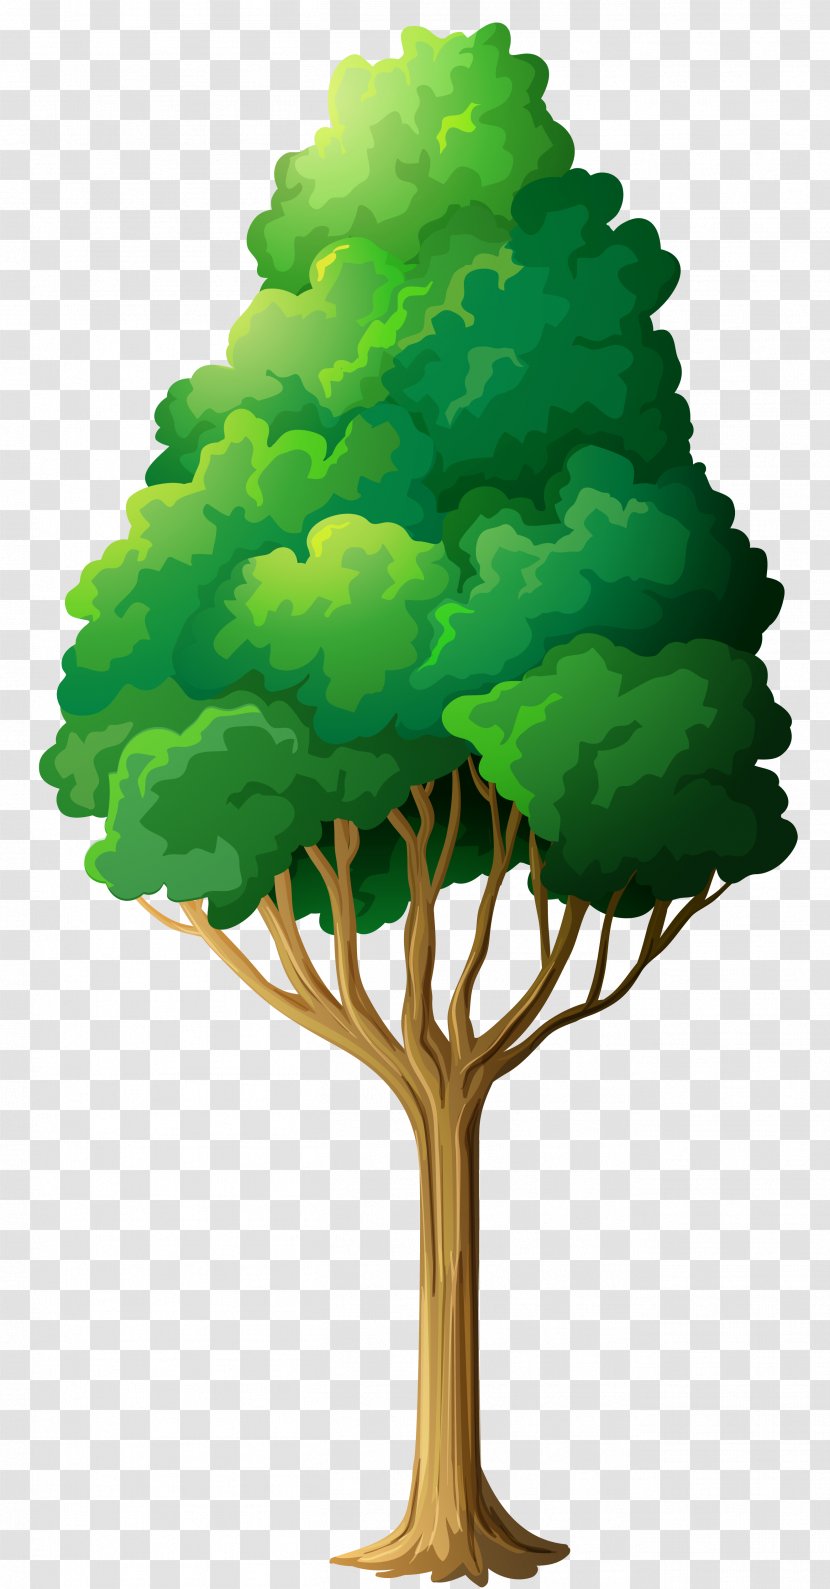 Clip Art - Woody Plant - Green Tree Clipart Transparent PNG